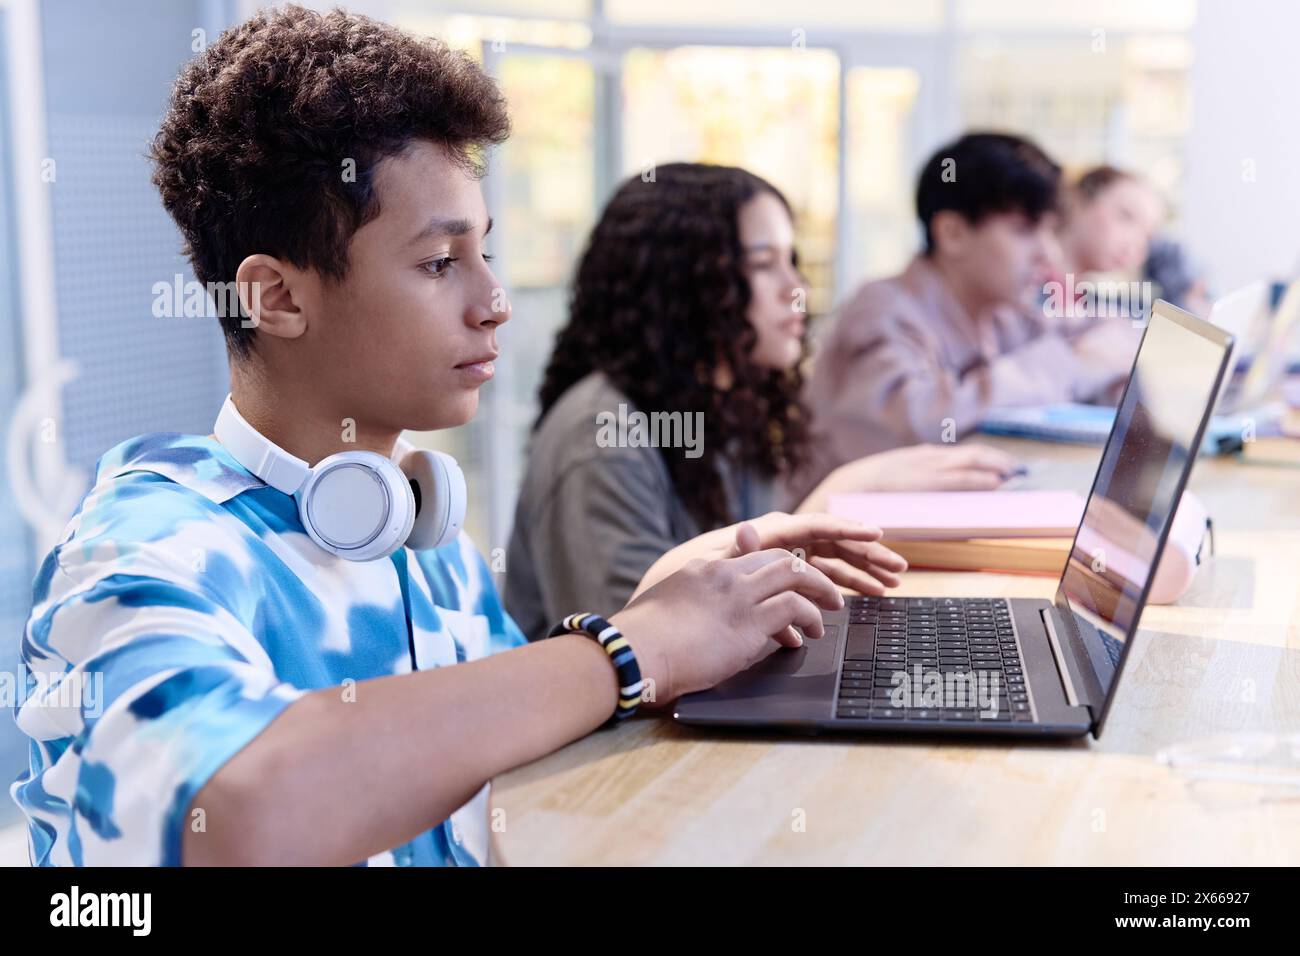 Side view portrait of Middle Eastern teenage boy using computer in library with diverse group of students in row copy space Stock Photo